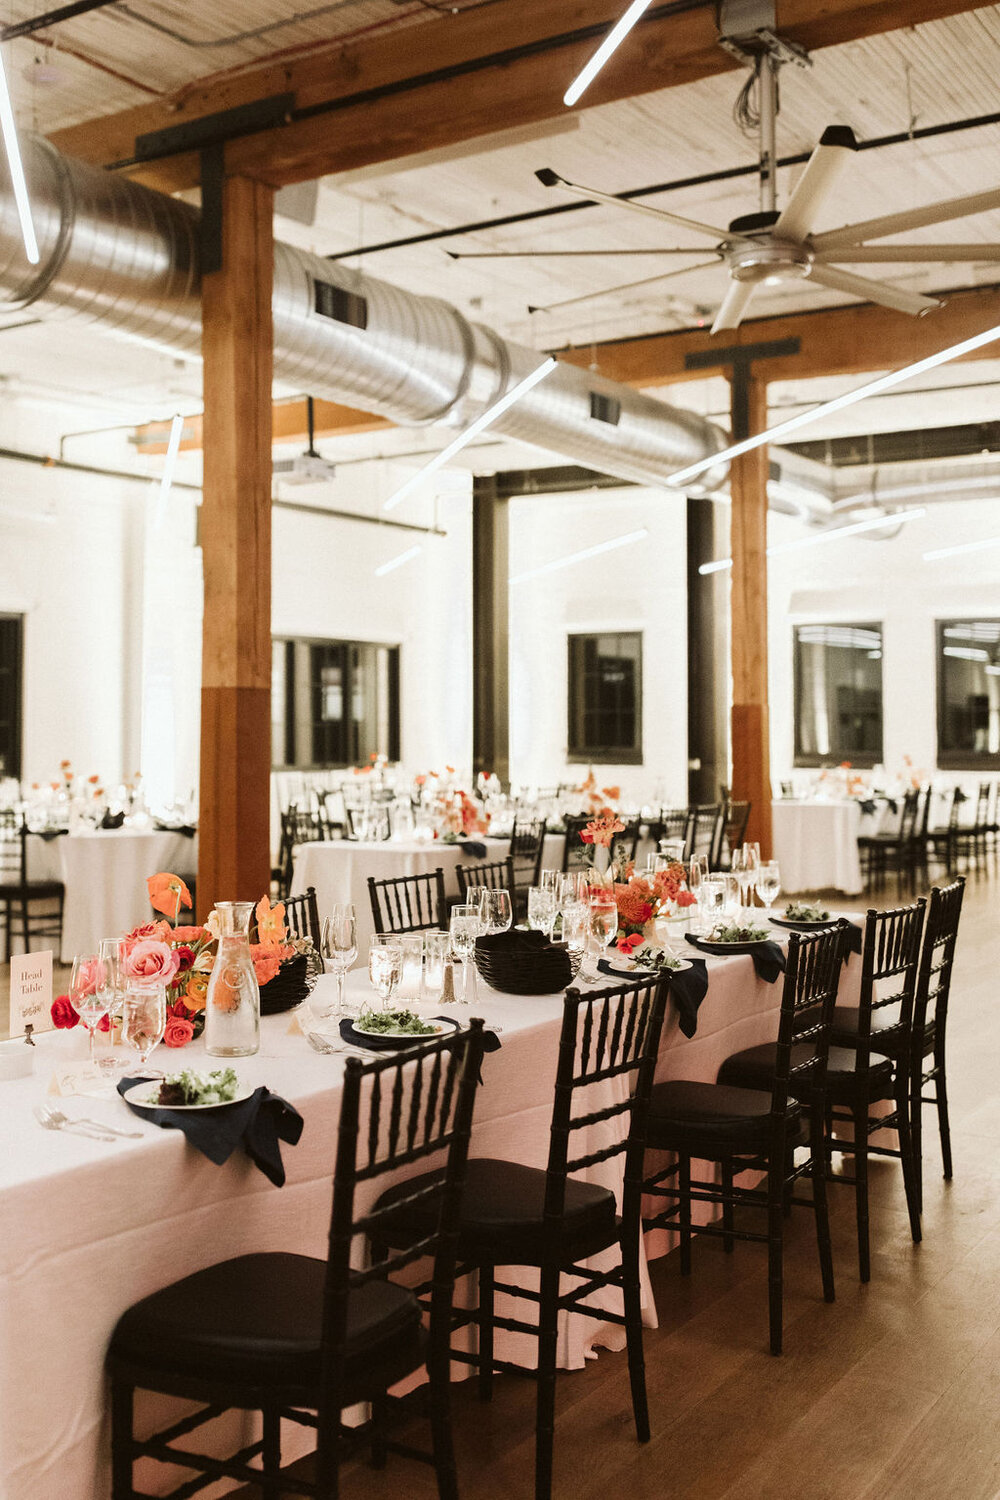 Block 41's indoor wedding space, with industrial touches, large wooden beams, and exposed ductwork